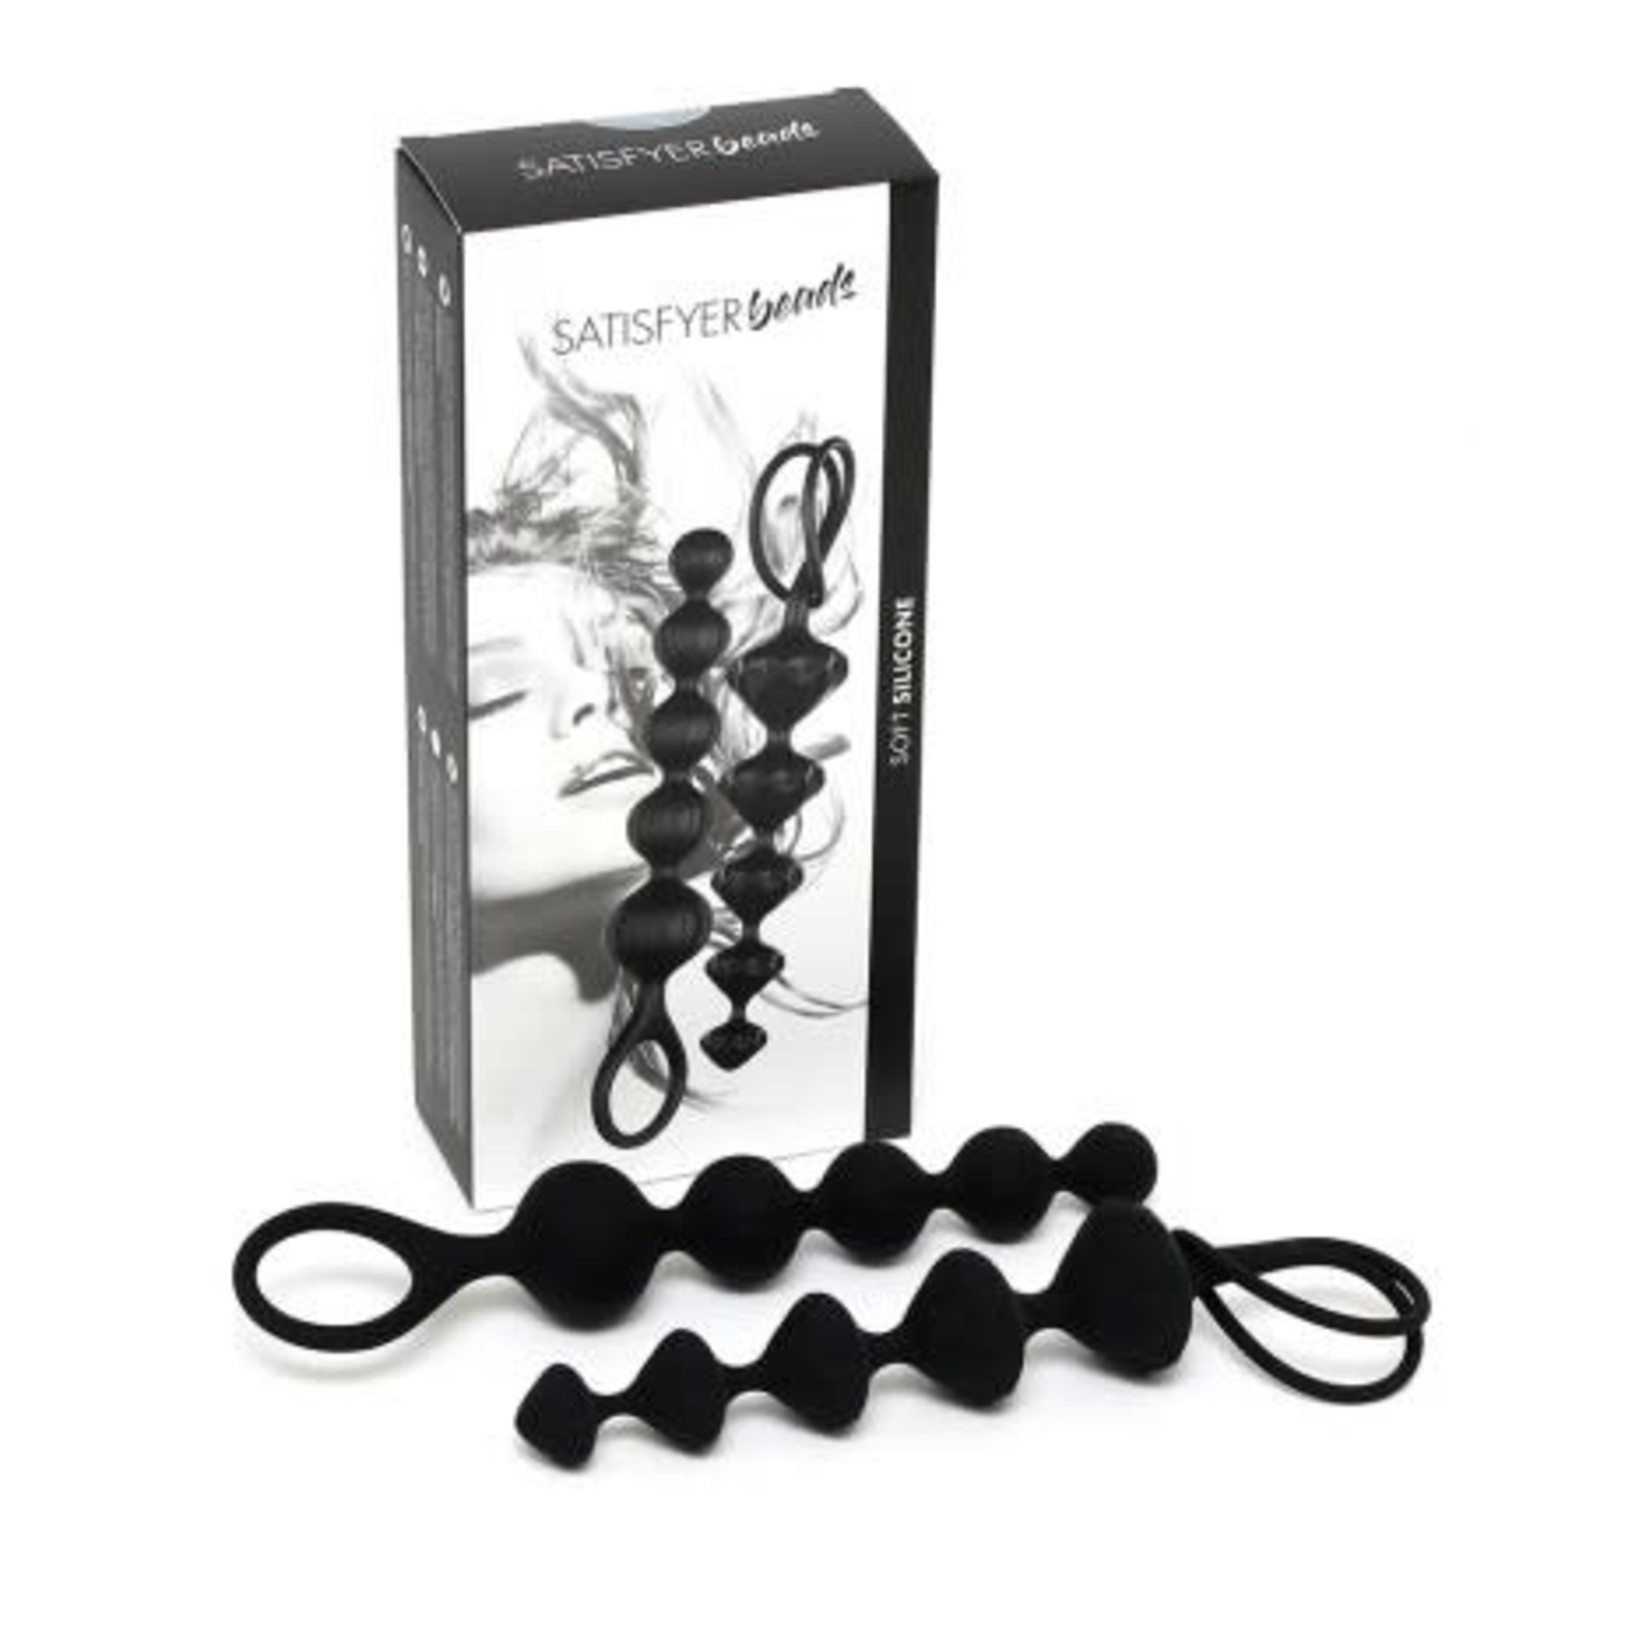 Satisfyer Love Beads Silicone Anal Beads Black 2 Each Per Set